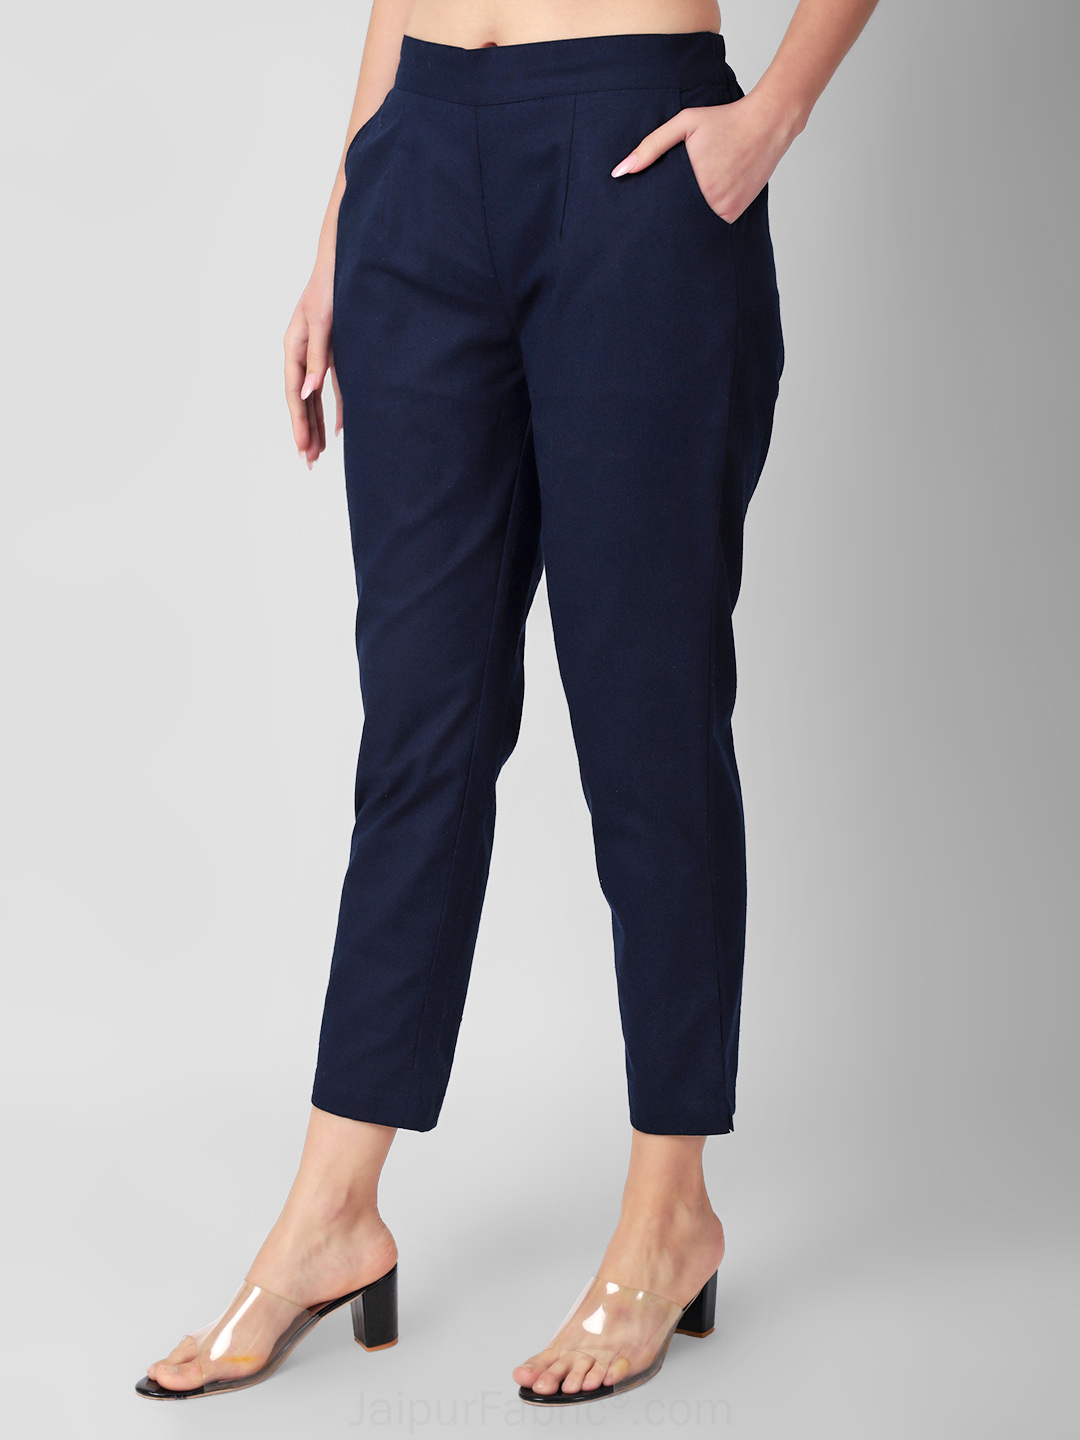 Navy Blue Women Cotton Pants casual and semi formal daily trousers